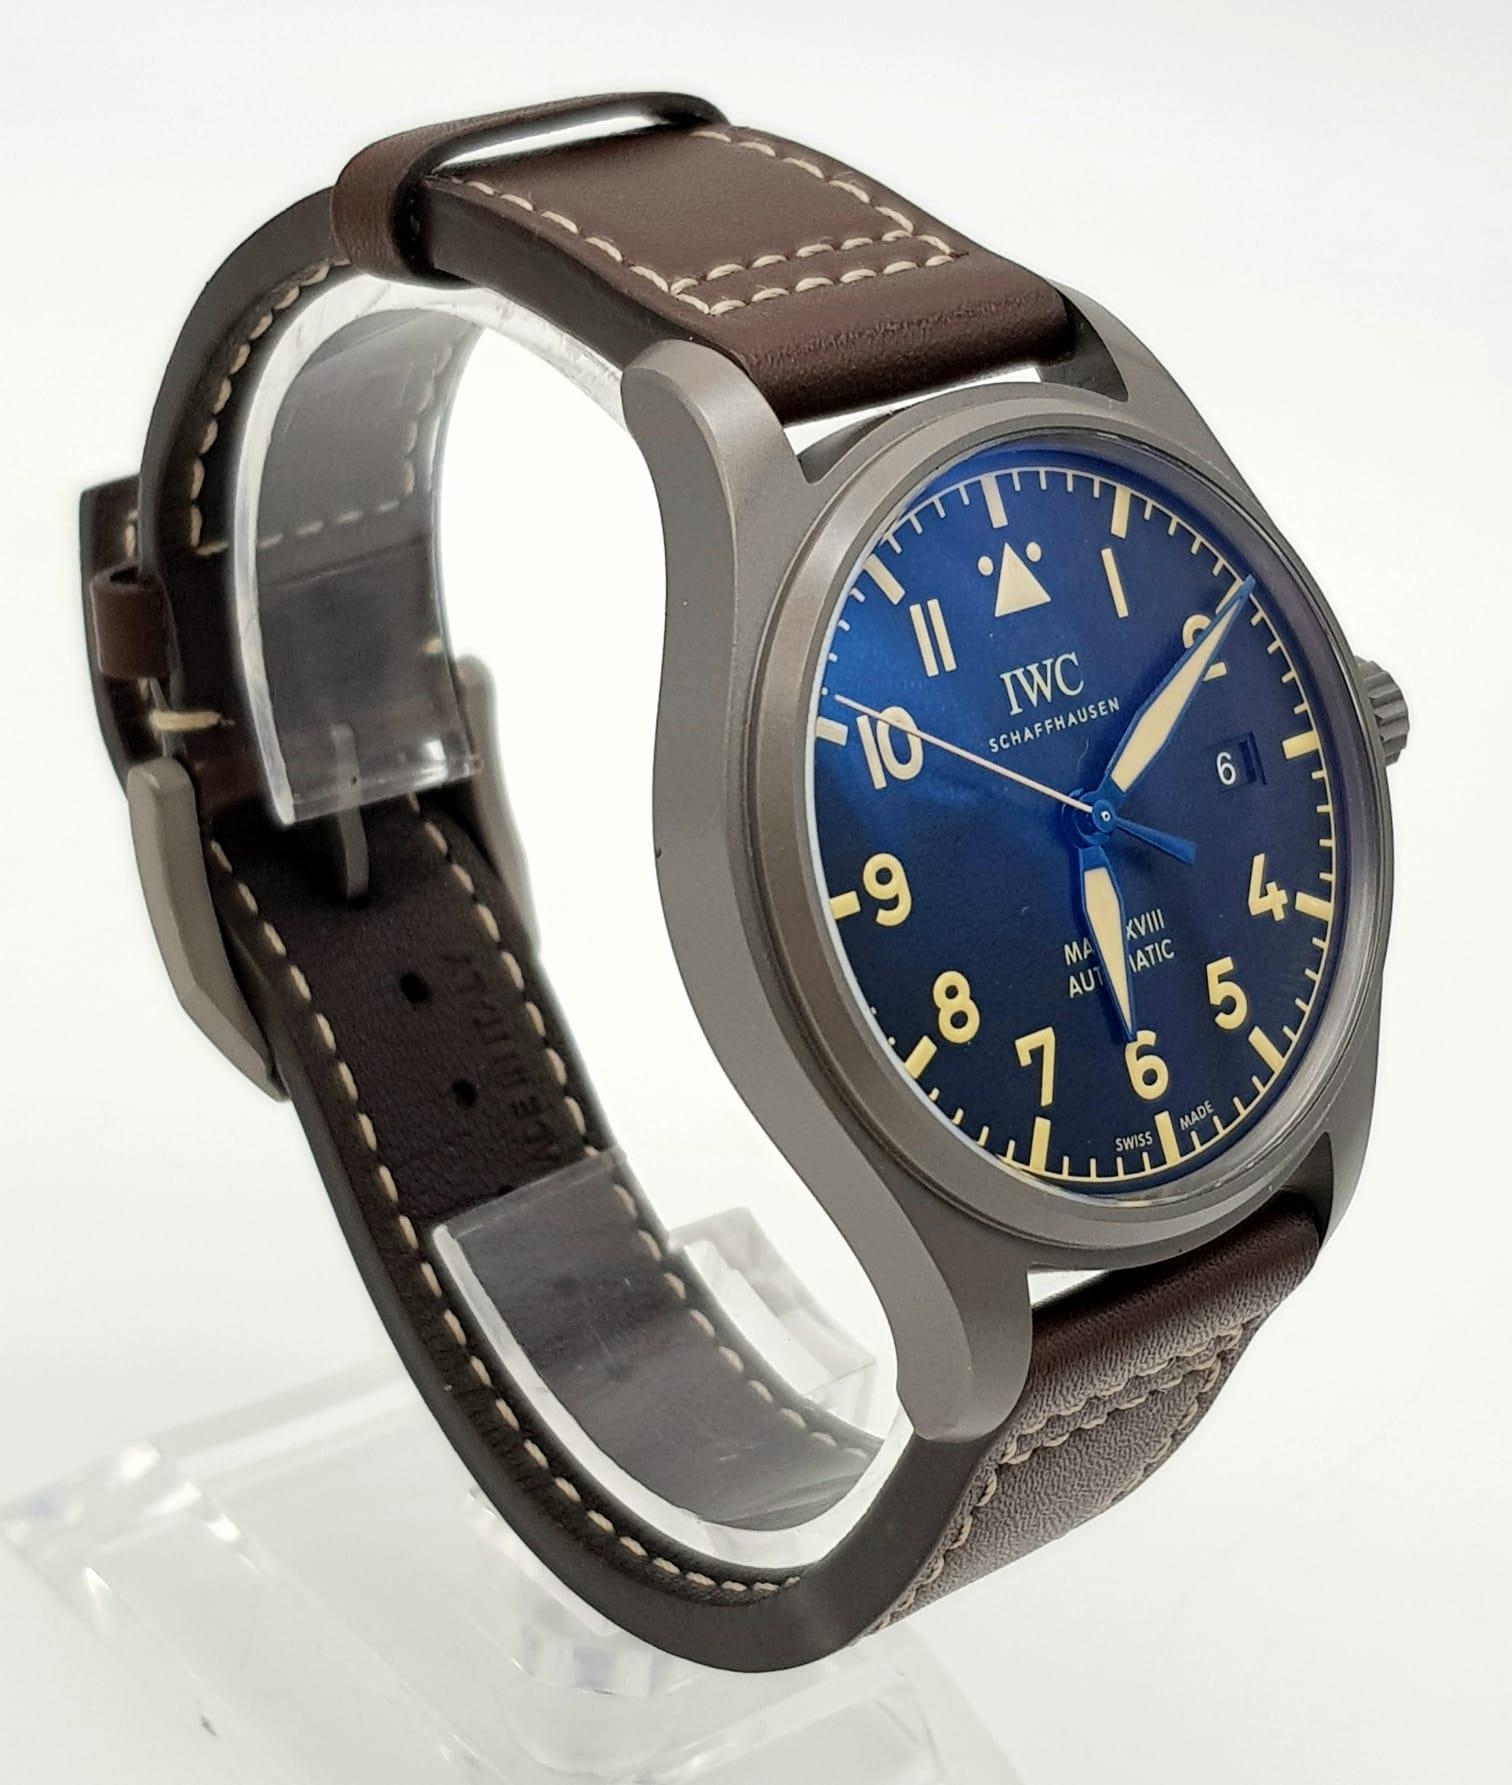 An IWC Mark XVIII Pilots Watch. Brown leather strap. Titanium case - 40mm. Black dial with date - Image 3 of 6